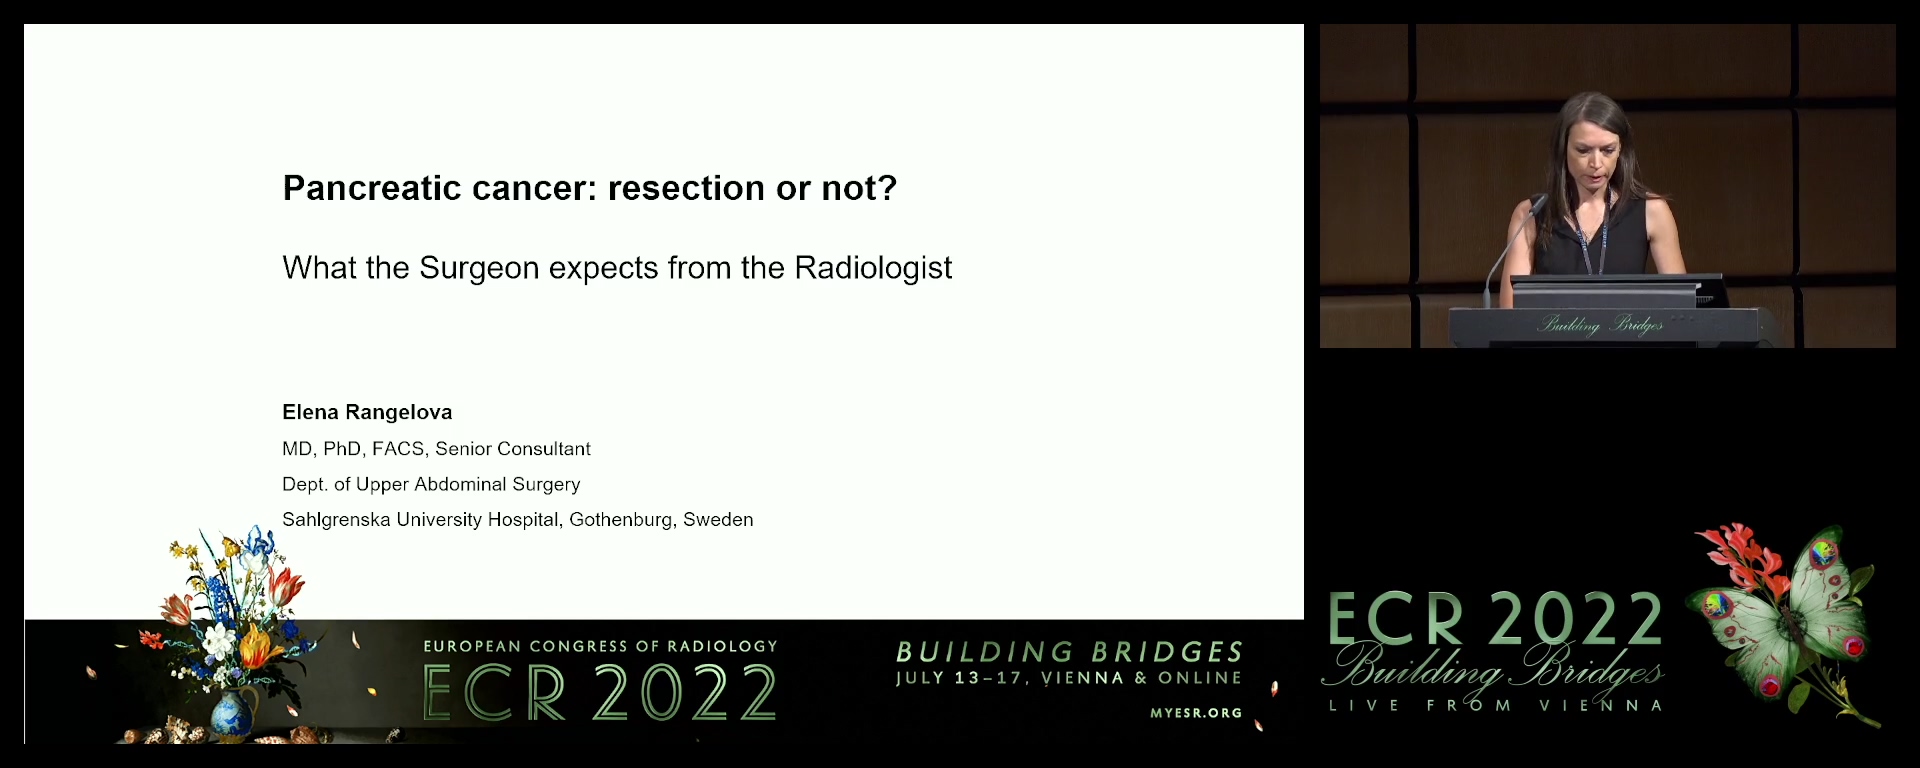 Resection or not: what the surgeon expects from the radiologist